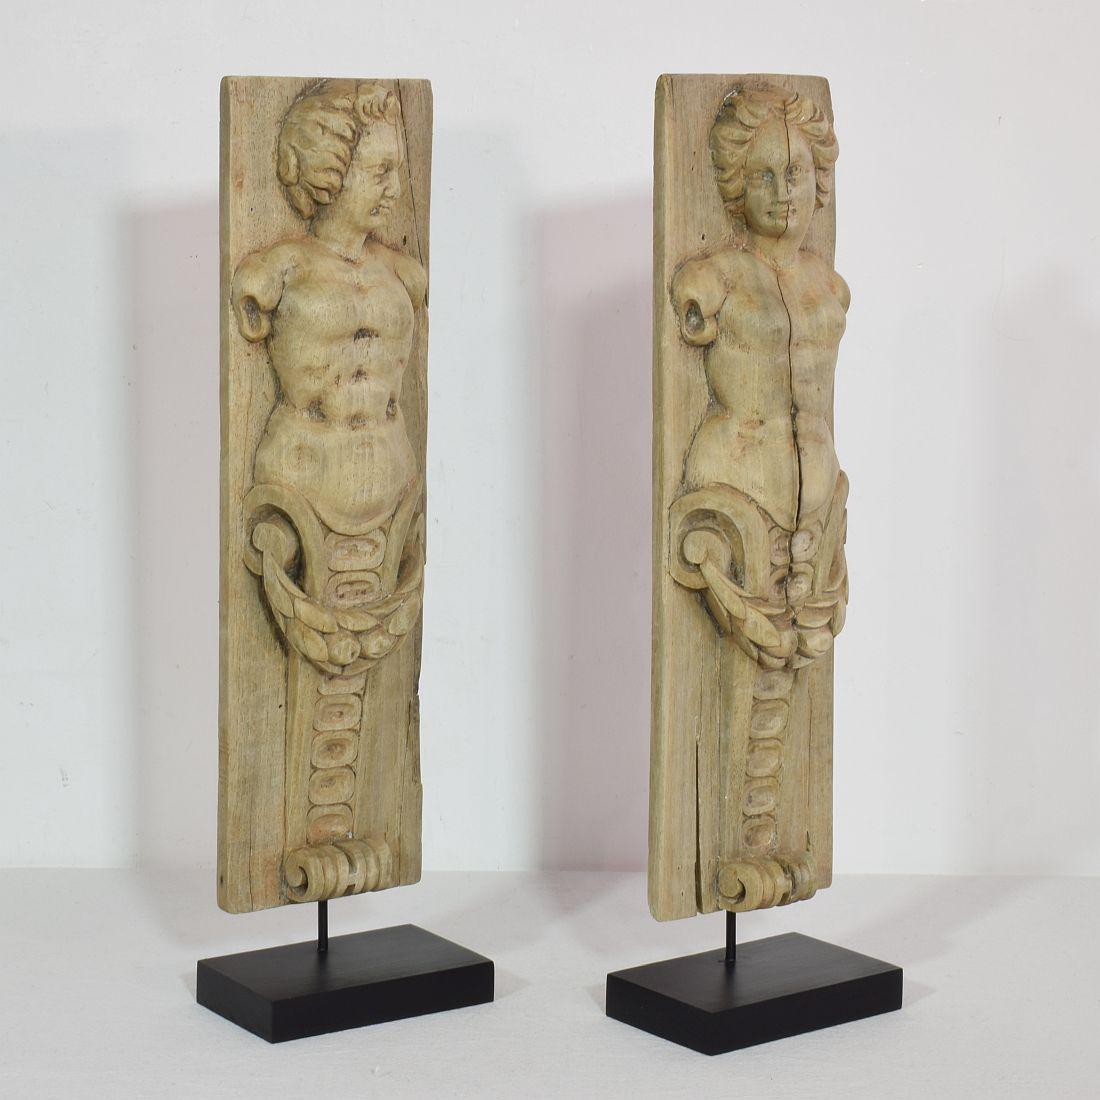 Hand-Carved Pair of French 18th Century Carved Wooden Baroque Panels with Caryatids